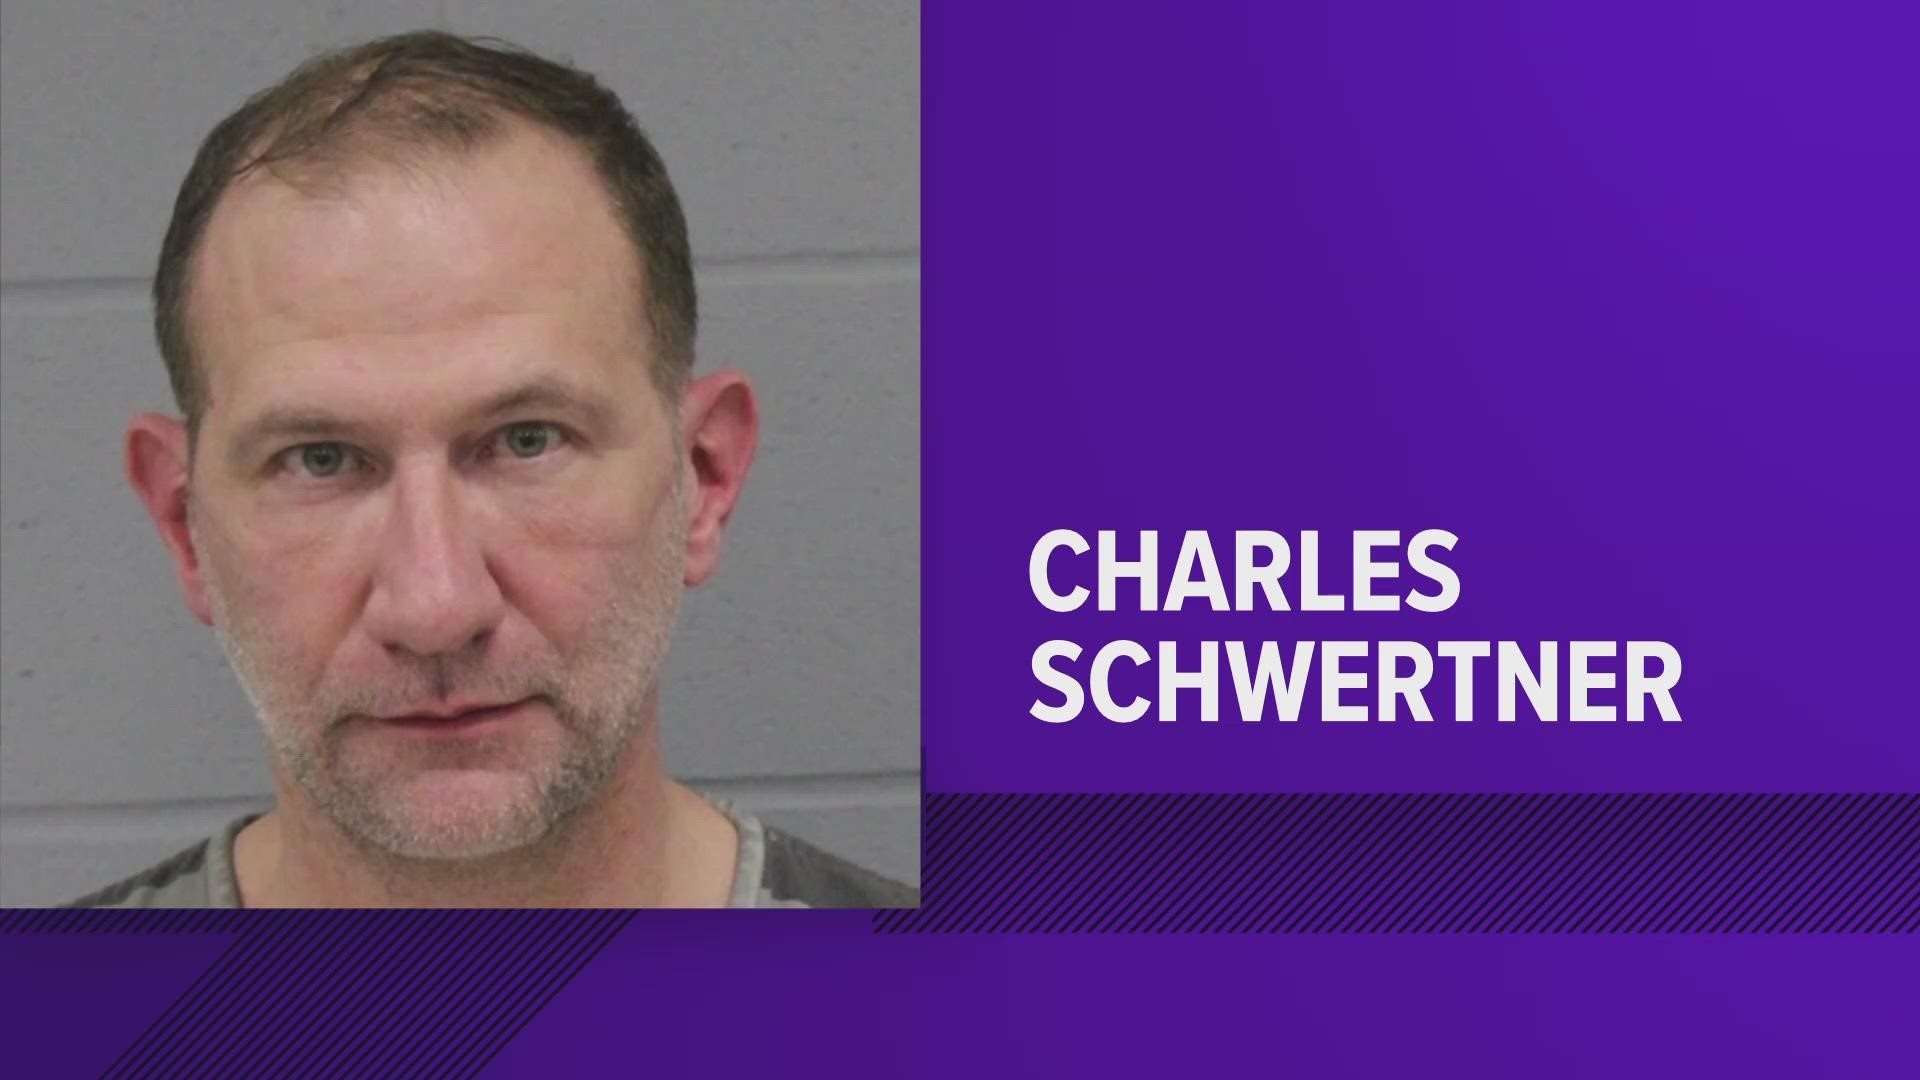 State Sen. Charles Schwertner of Georgetown was arrested early Tuesday morning in Austin for allegedly driving while intoxicated.